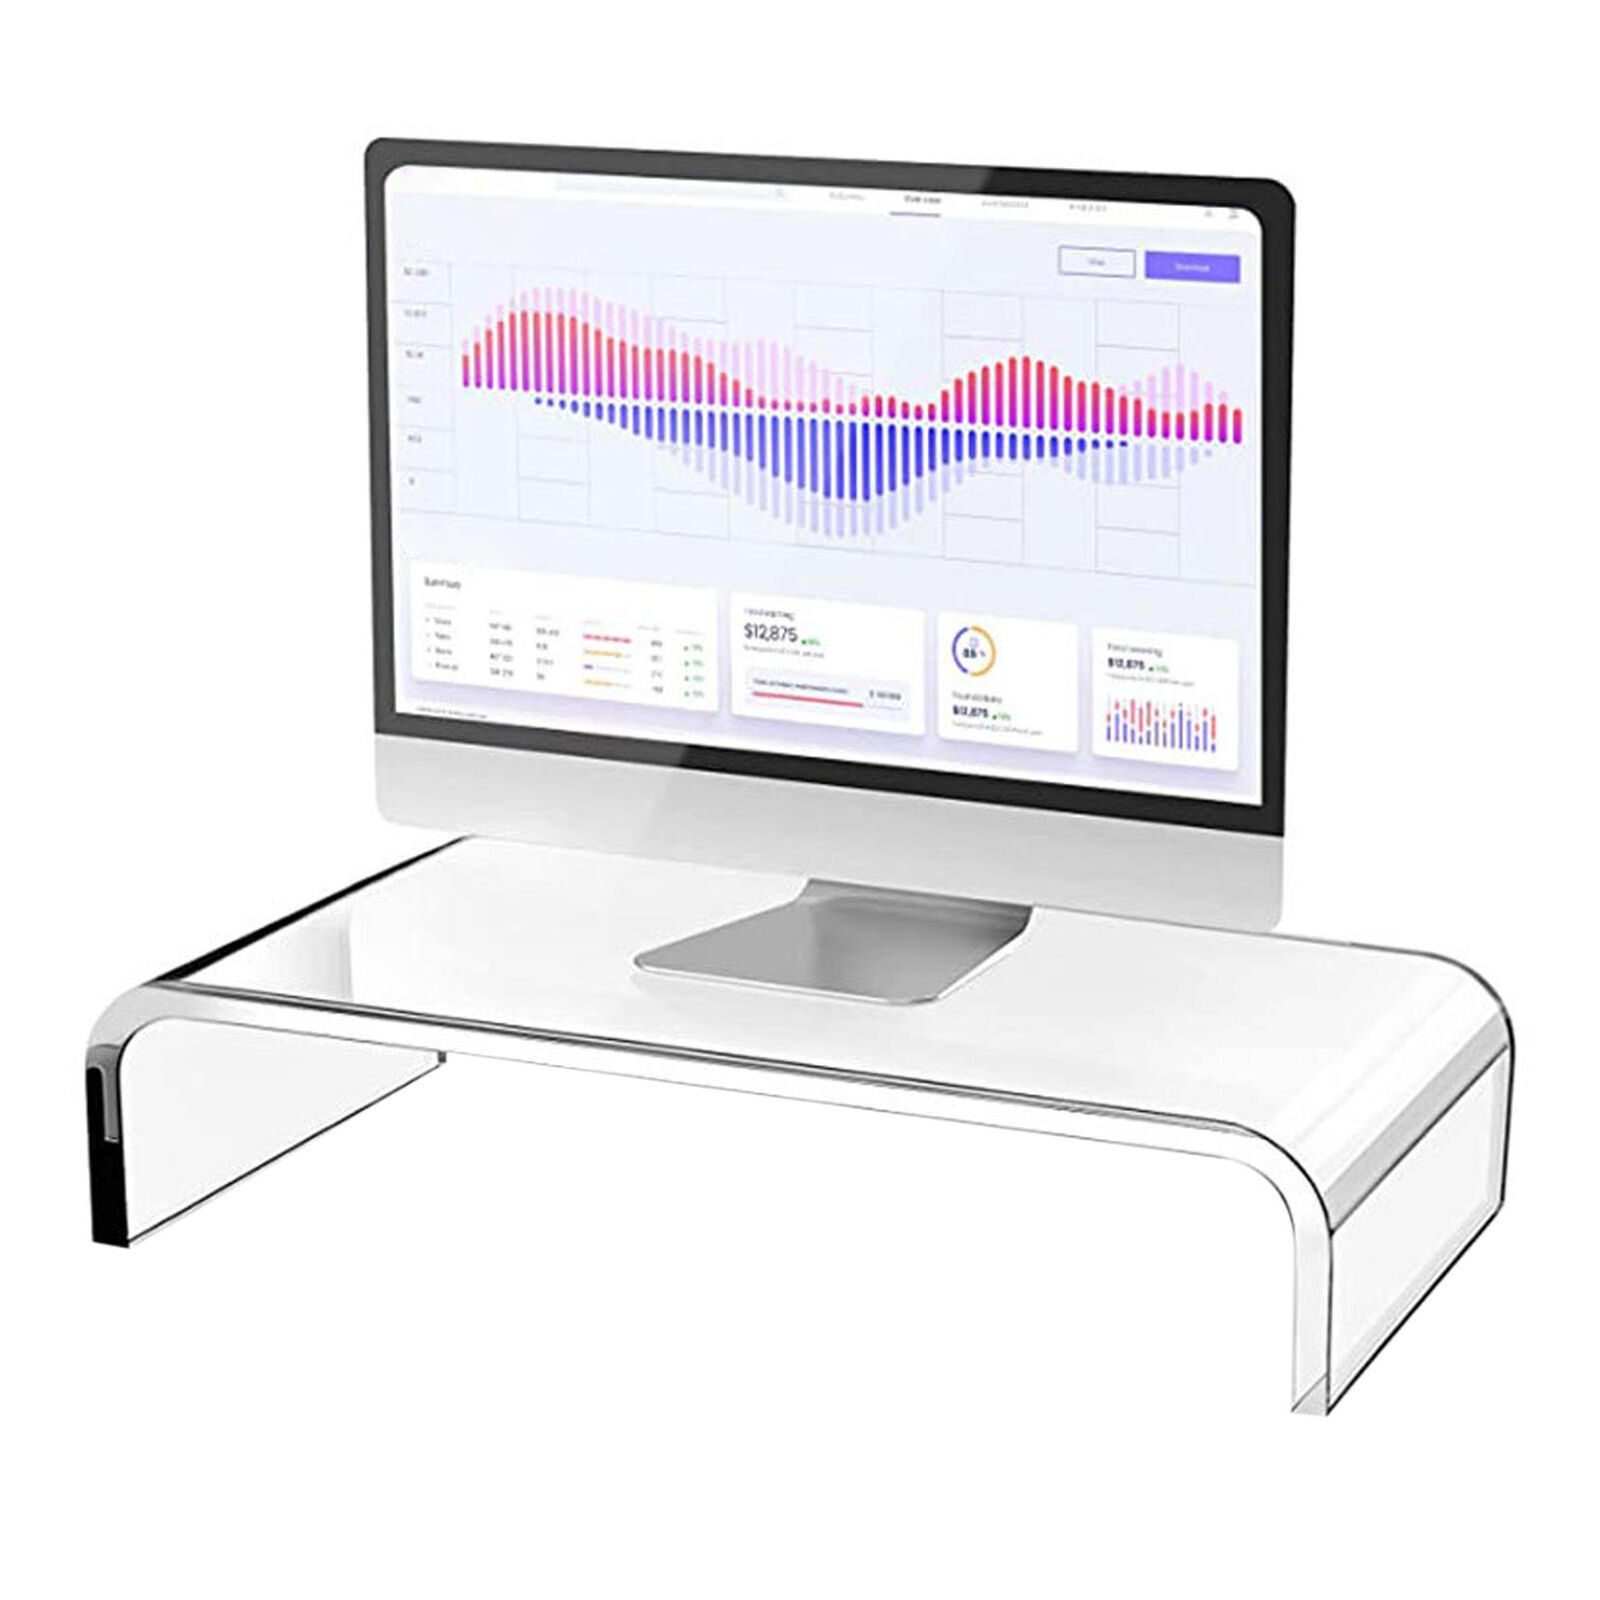 Acrylic Desktop Monitor Stand Riser for Laptop, Computer